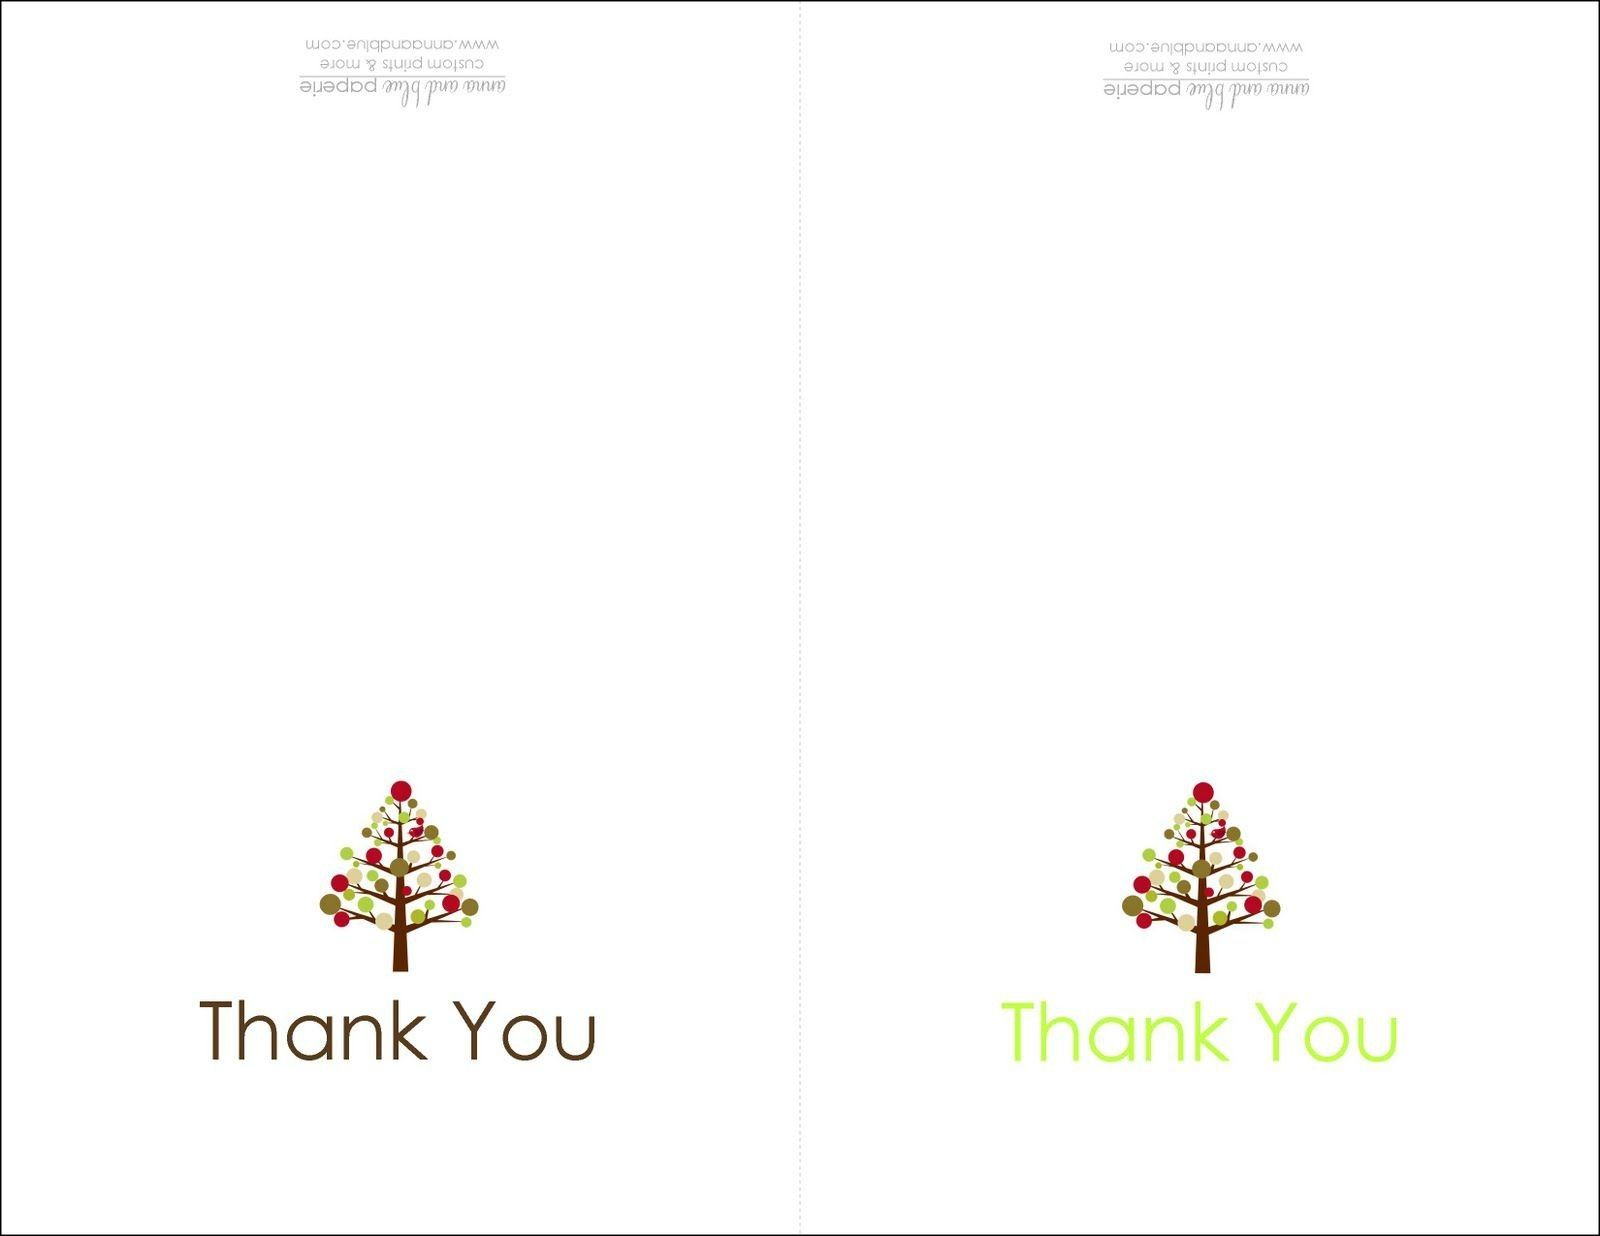 Thank You Card Design Template New Thank You Card Printable | Cards - Thank You Card Free Printable Template